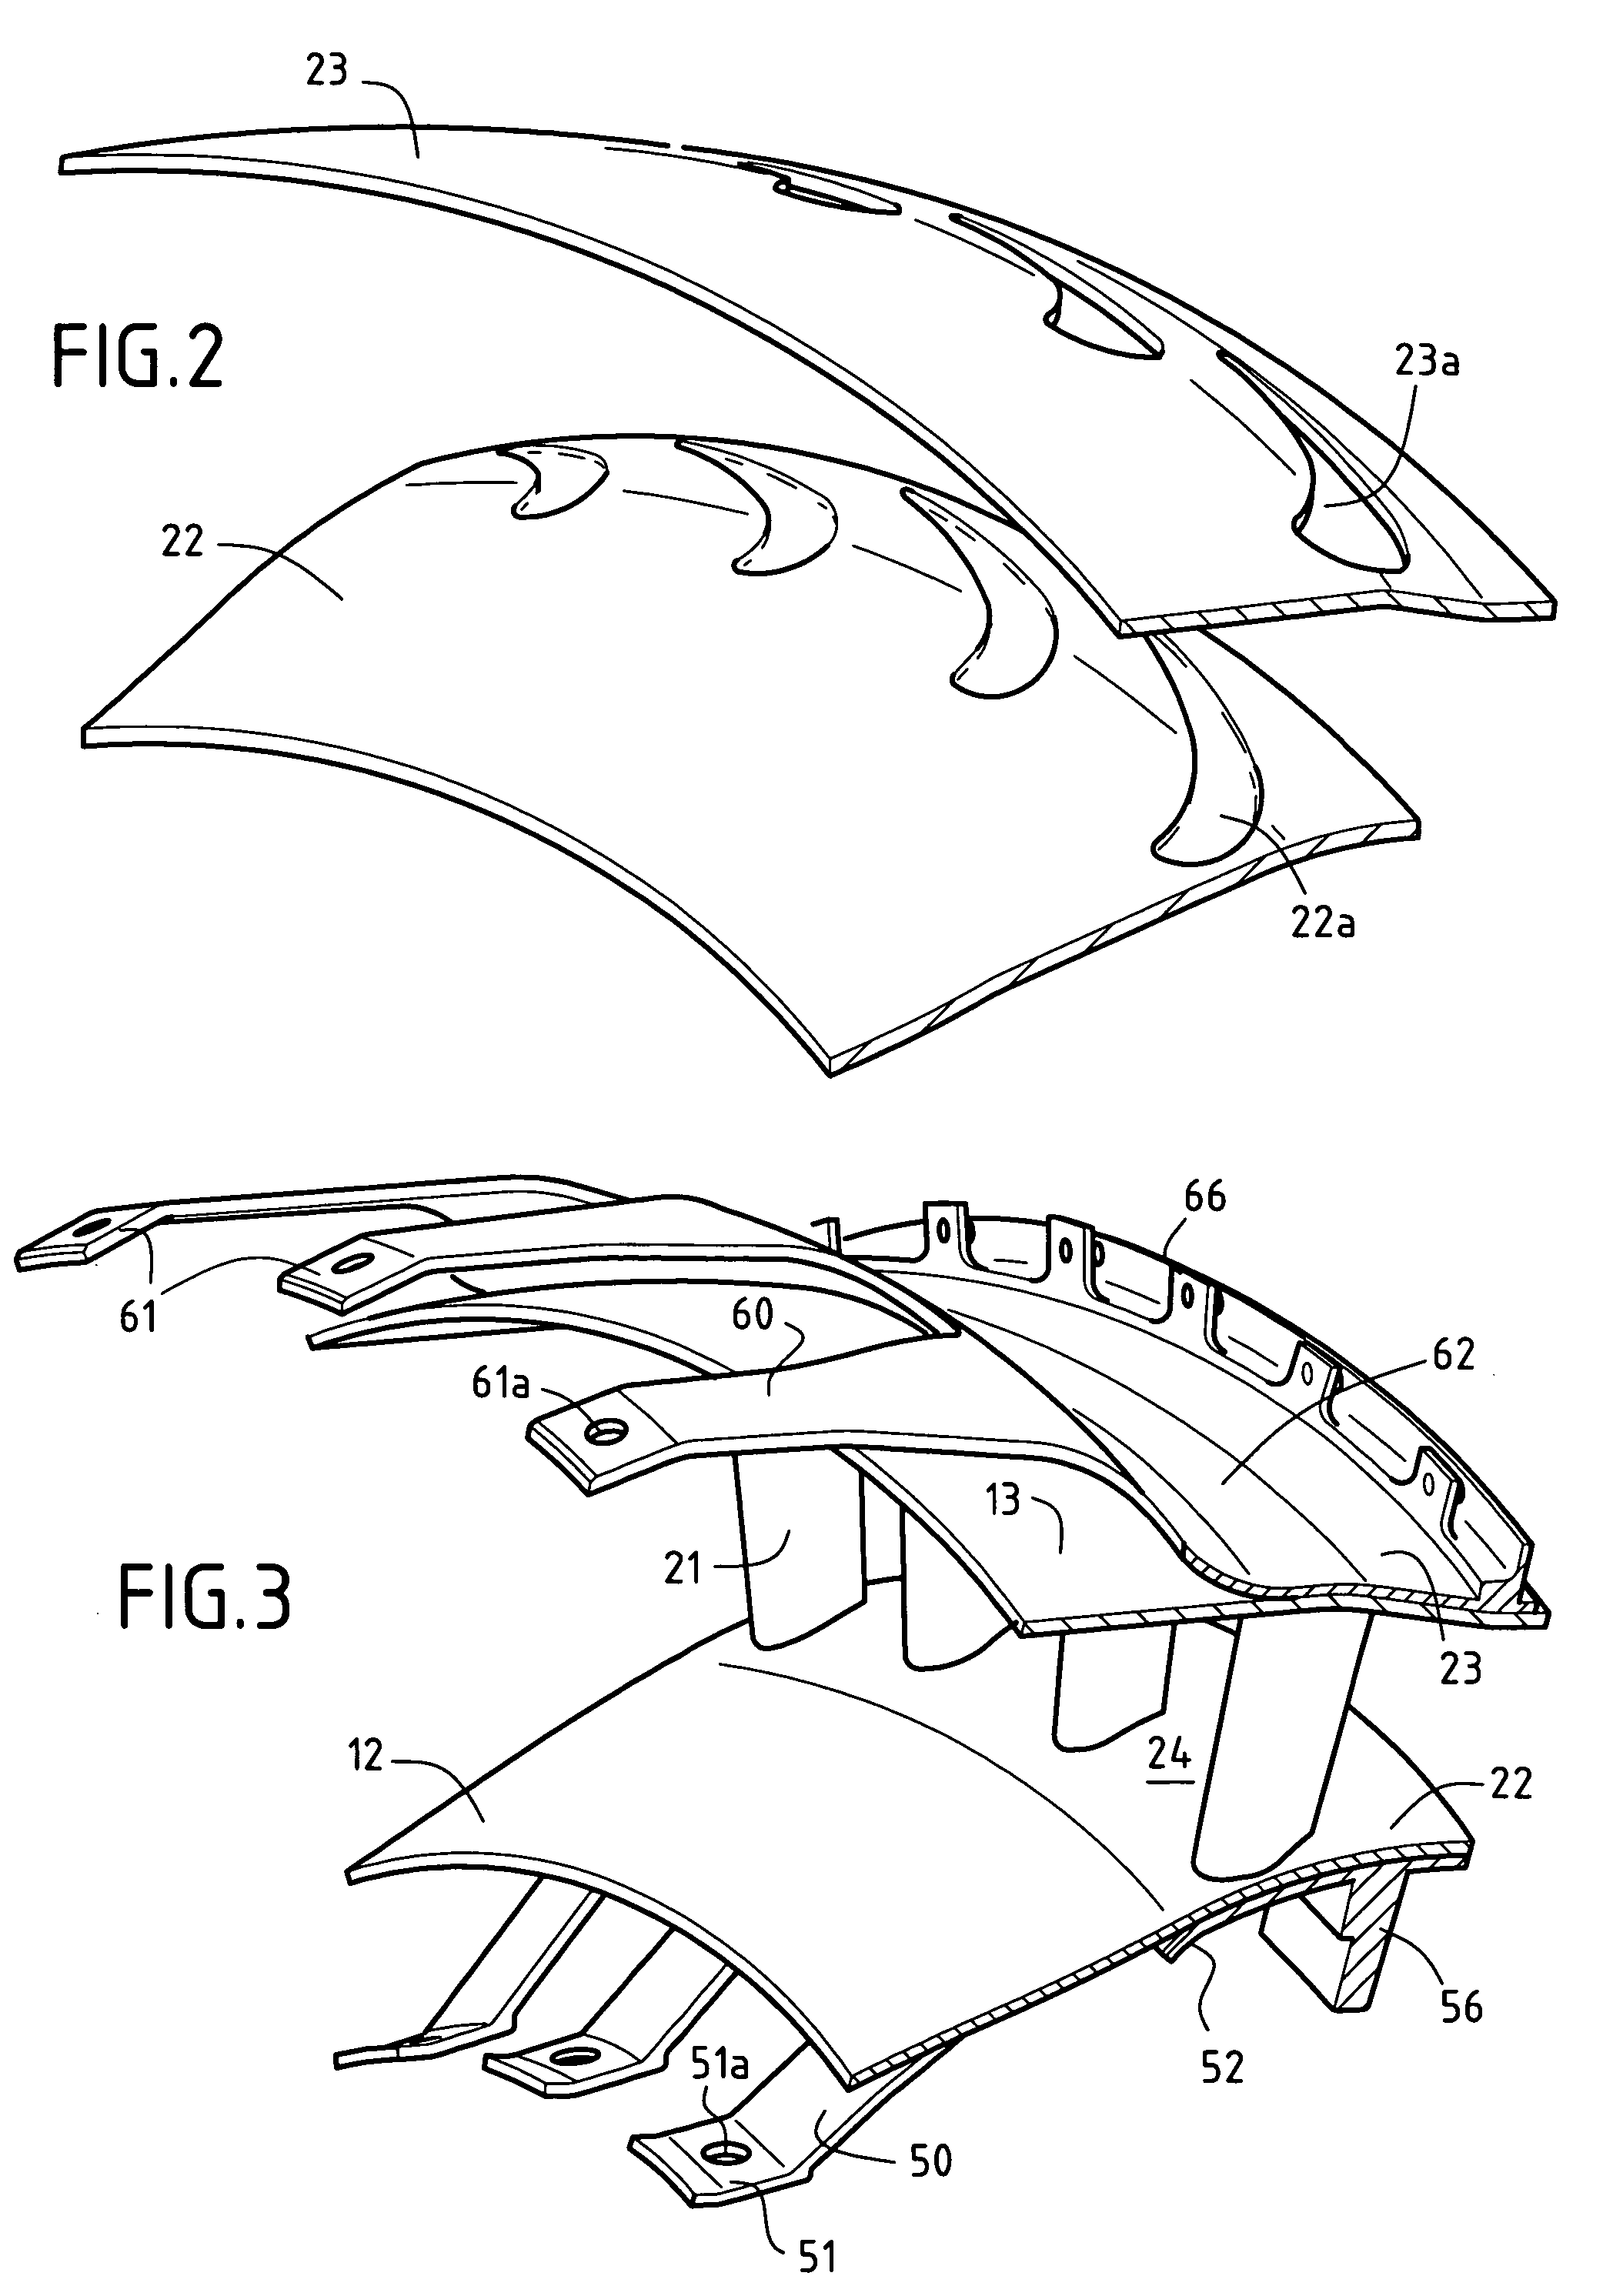 Mounting a turbine nozzle on a combustion chamber having CMC walls in a gas turbine